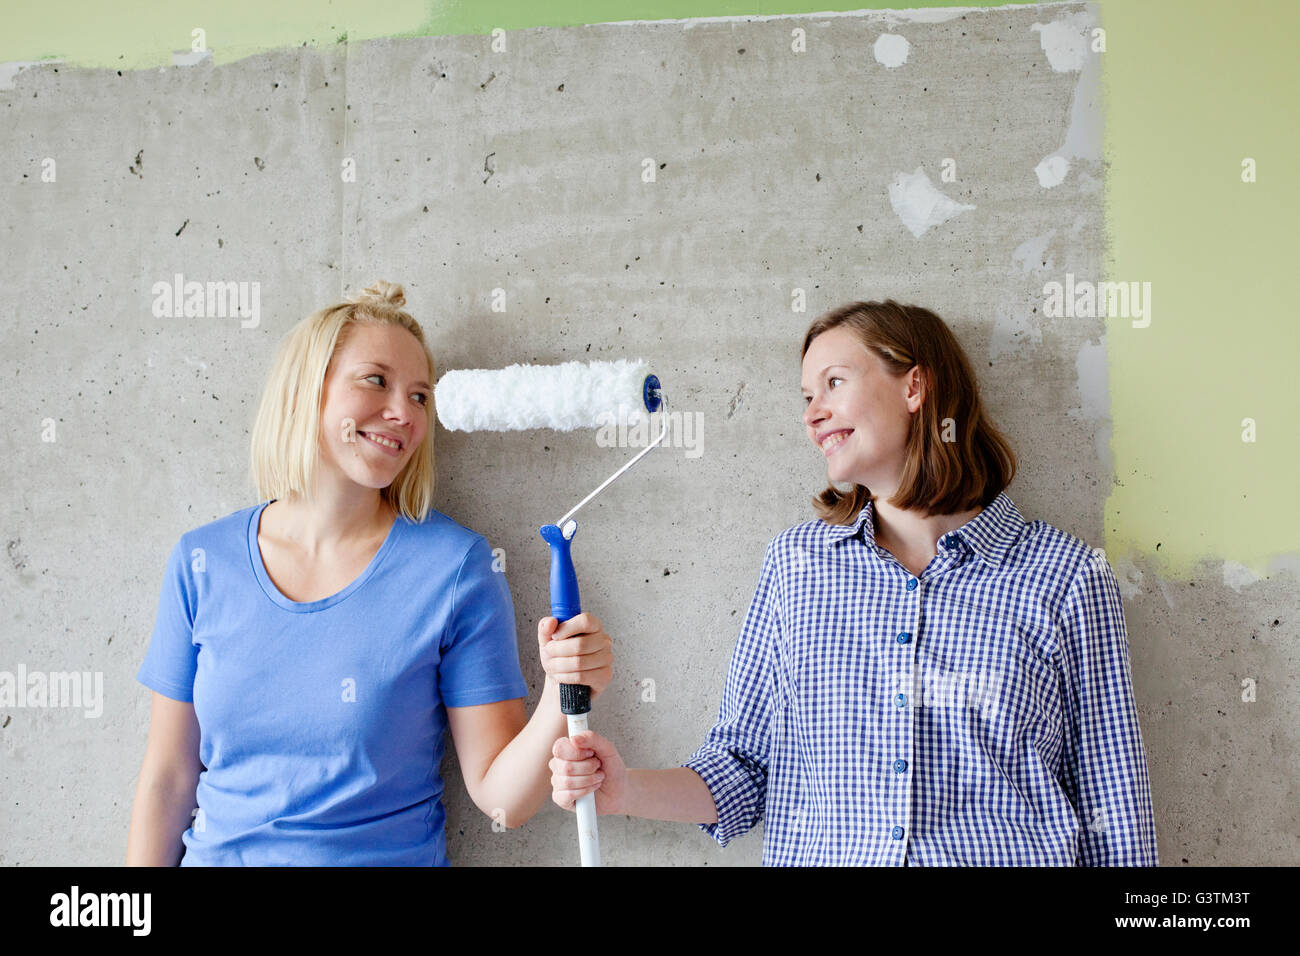 Finland, Young women standing by wall and holding paint roller Stock Photo